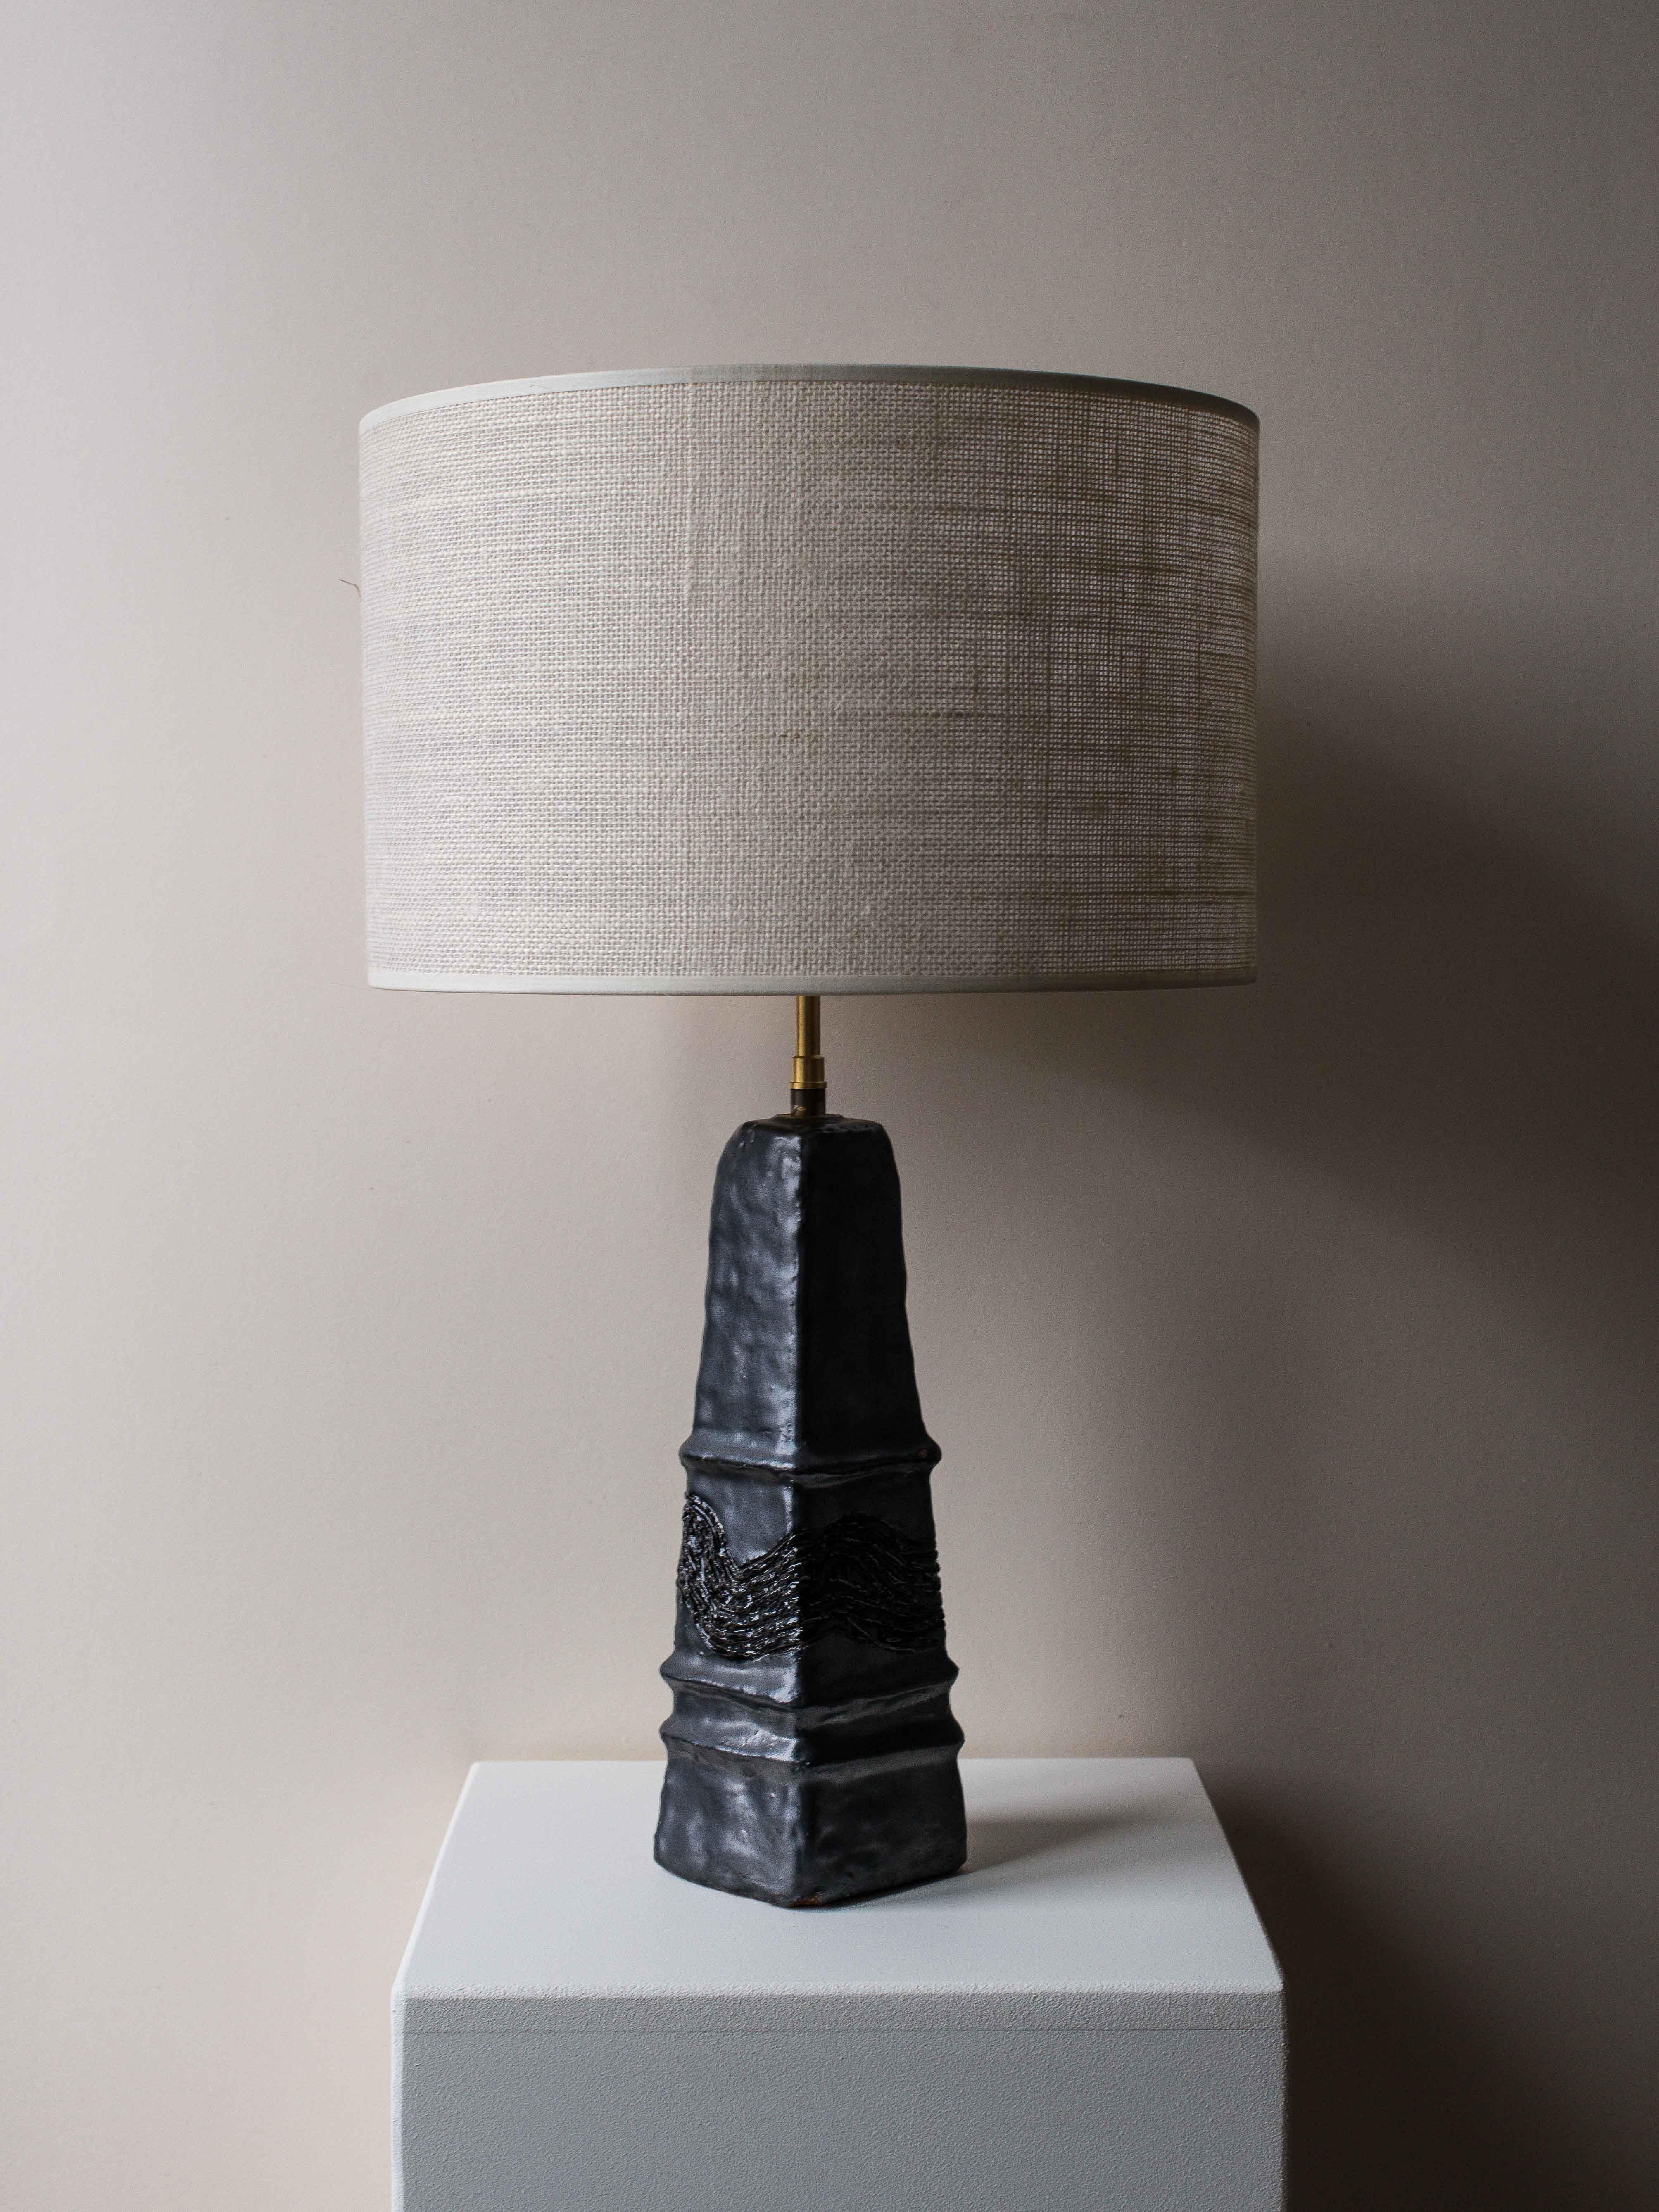 clay table lamp